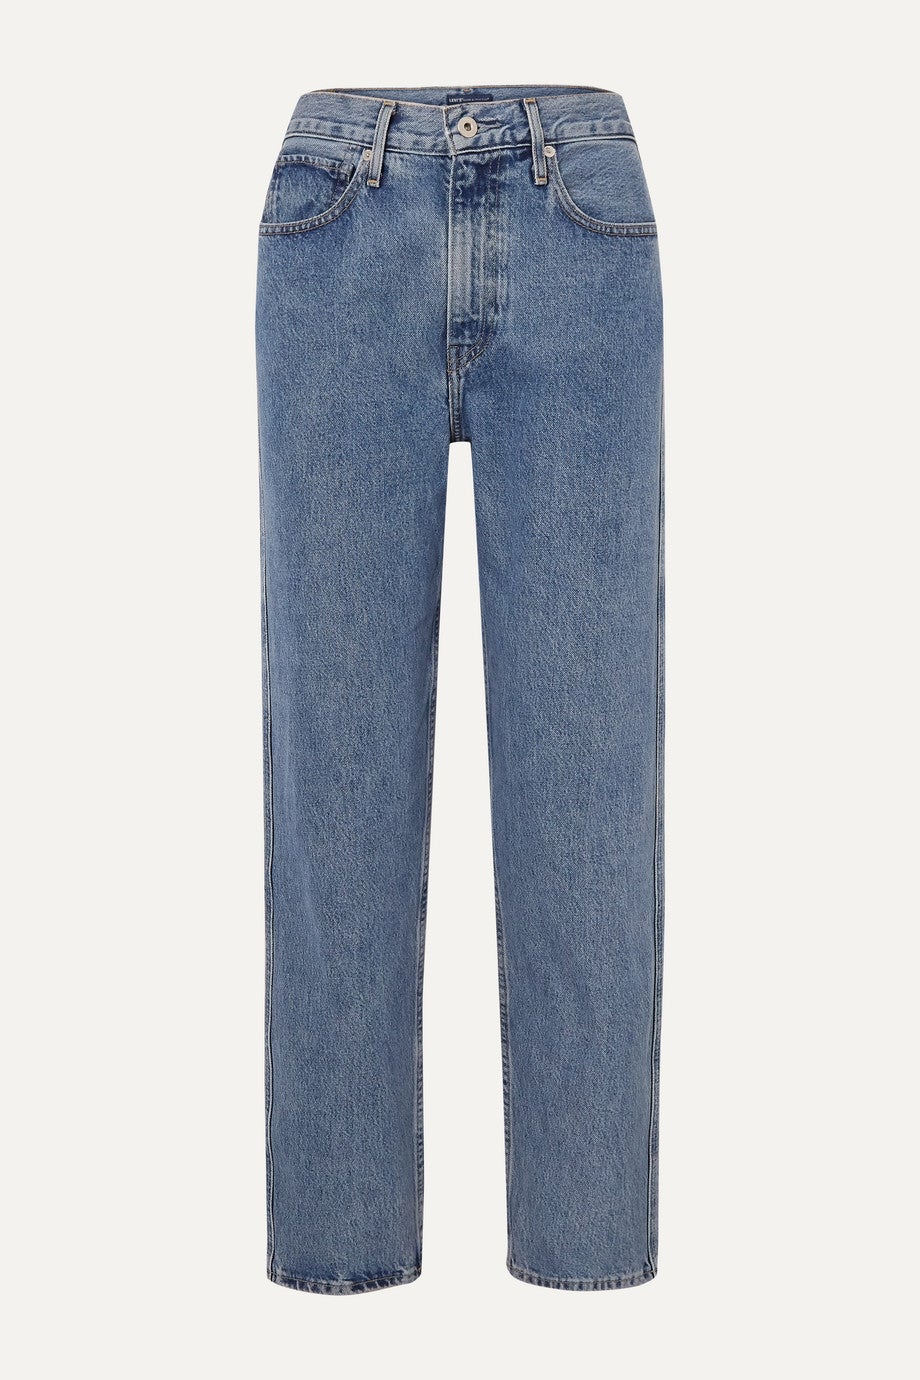 Levi’s Made & Crafted + The Column Mid-rise Straight-Leg Jeans